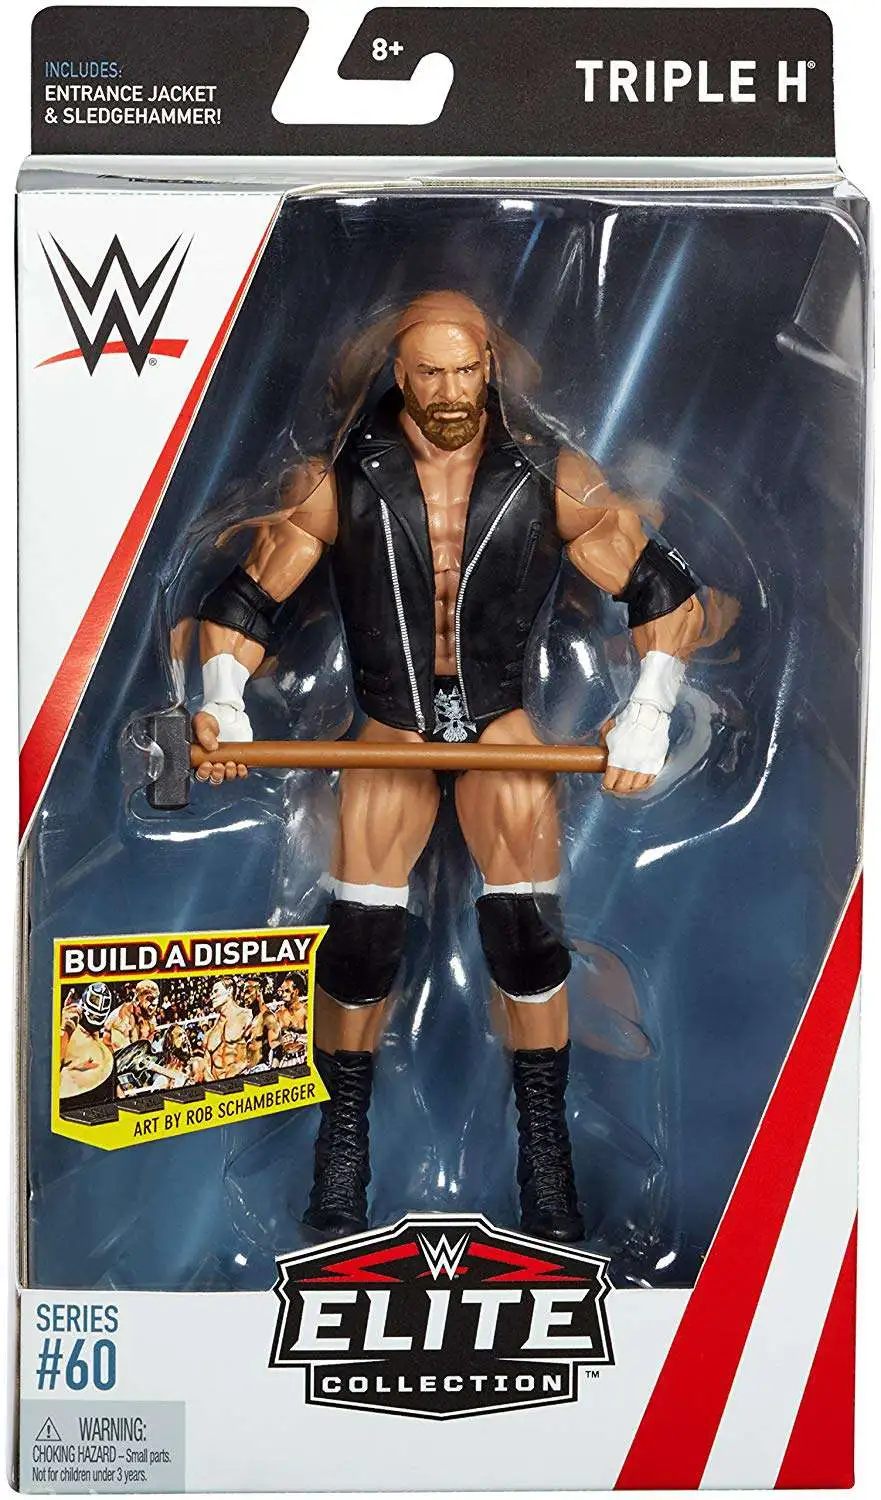 WWE Elite Collection Series # 60 Triple H Action Figure 